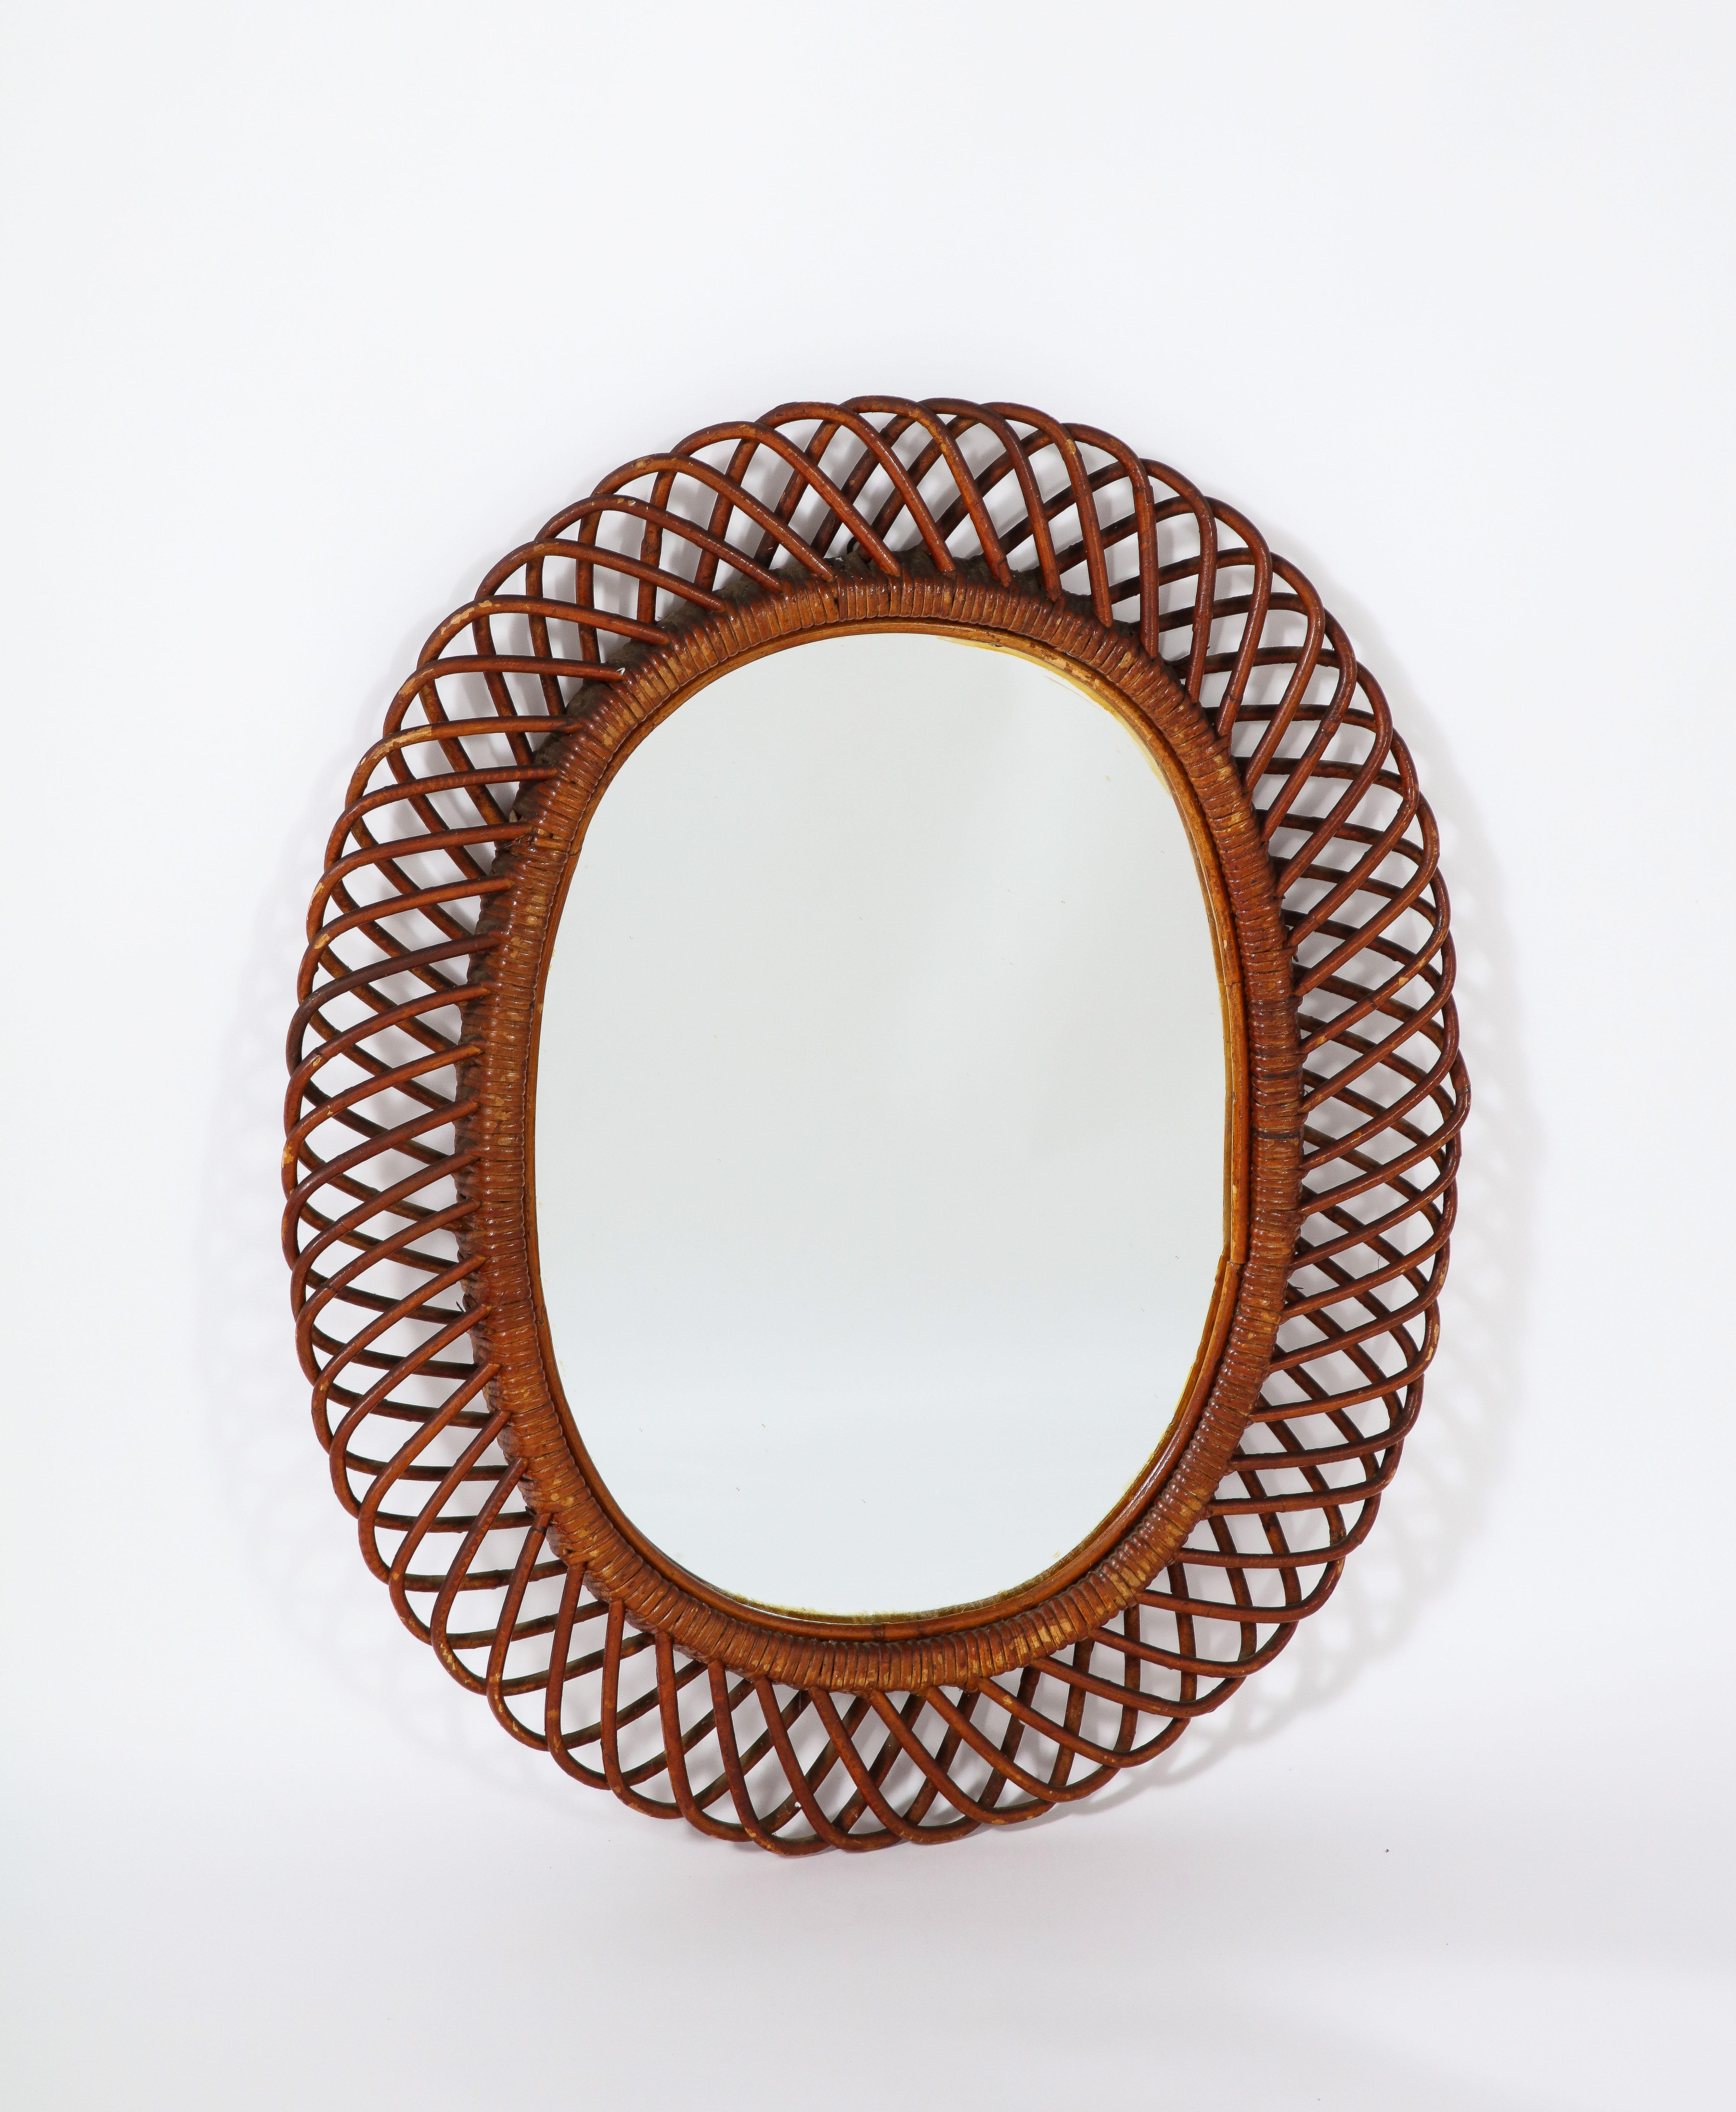 A classic Italian 1950's oval bamboo mirror by Bonacina; with original velvet backing. The bamboo has been stained, with a rich brown hue. 
Italy, circa 1950
Size: 29 1/2' high x 24 1/2